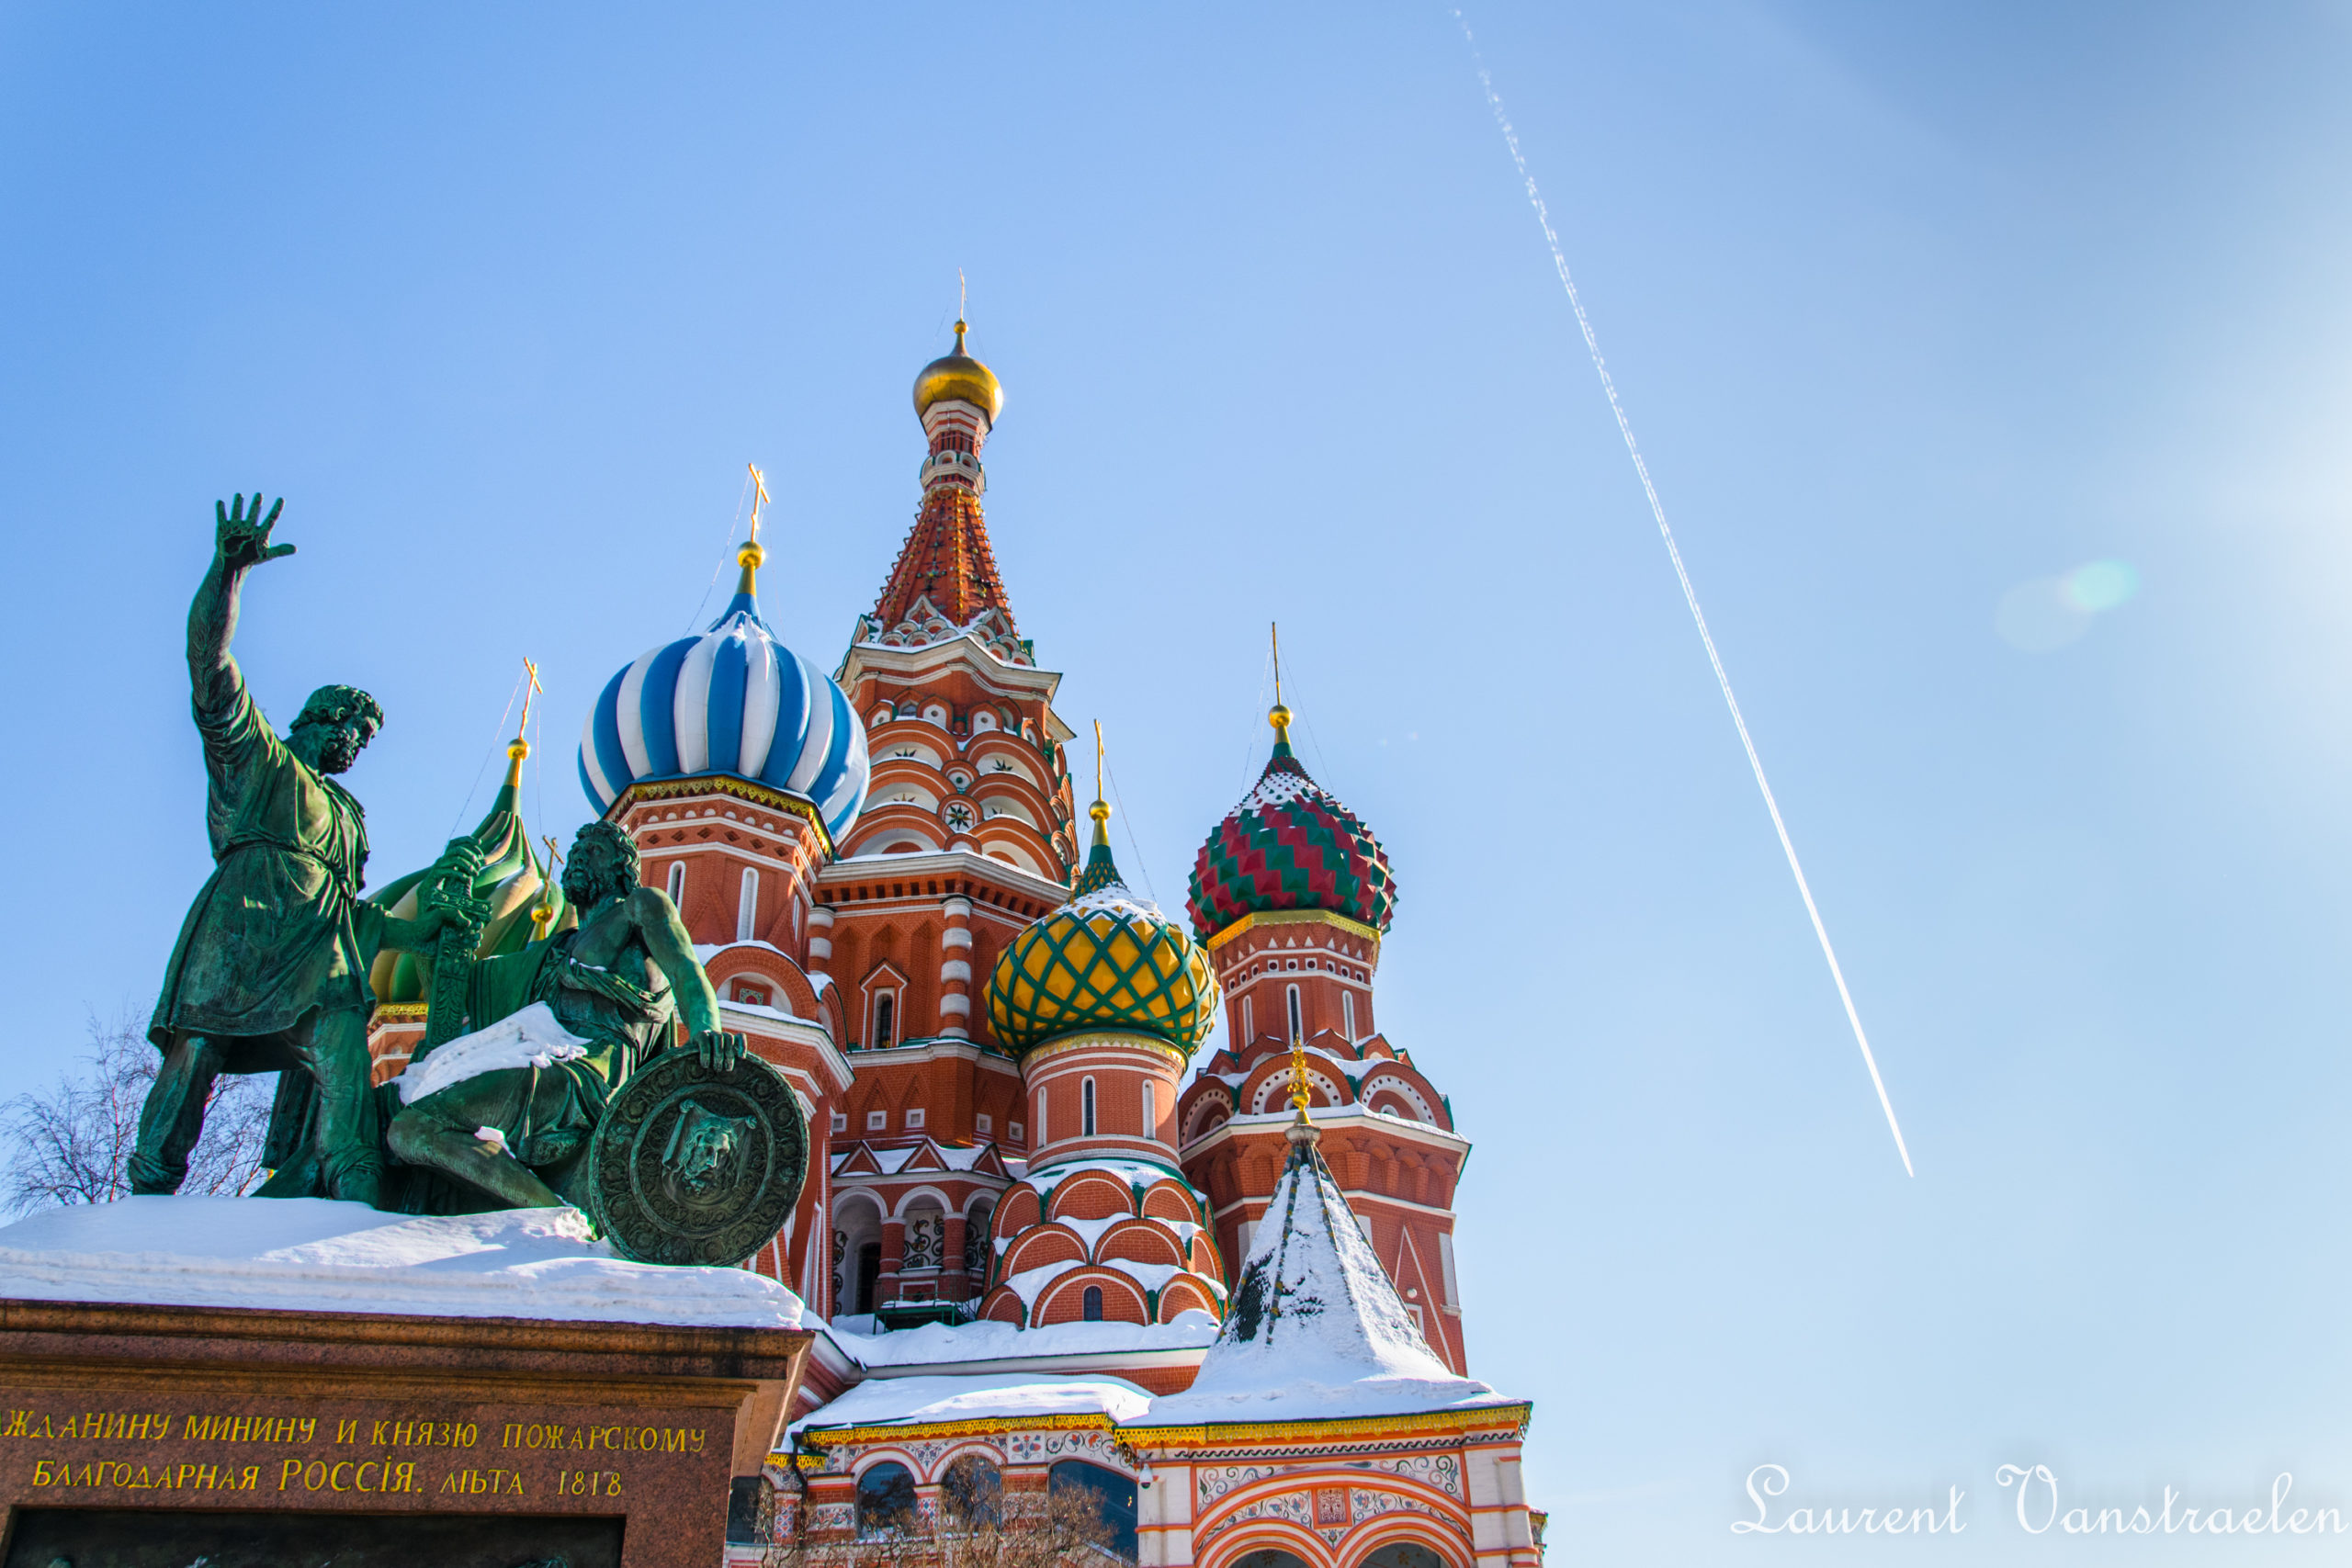 Saint Basil’s Cathedral in Moscow